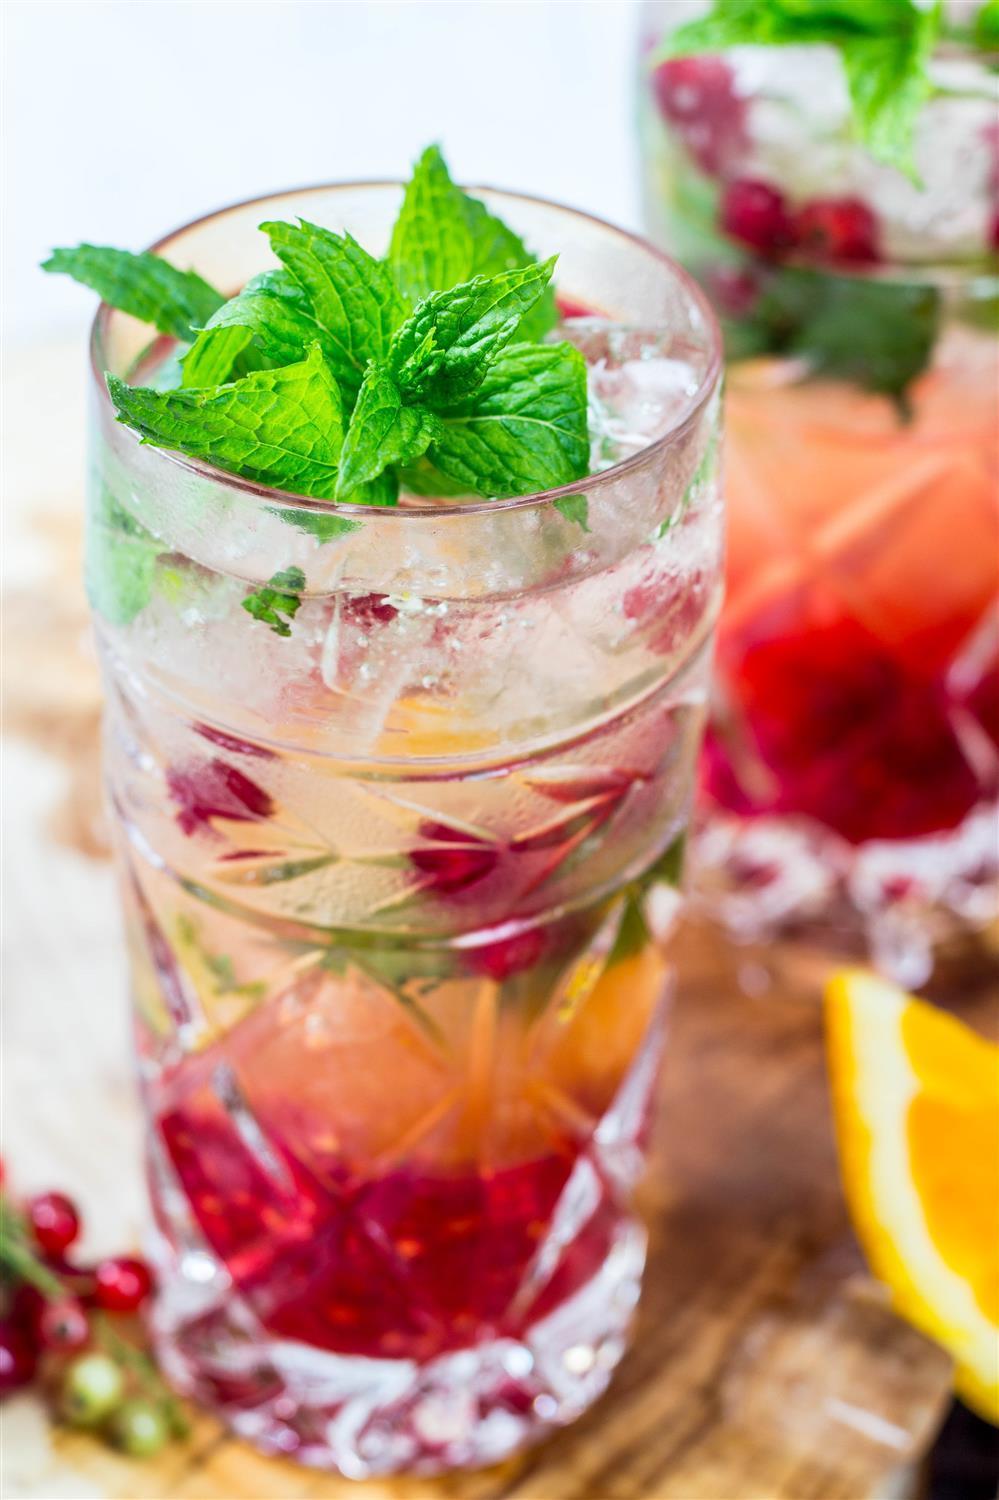 Use Your Noodles - Red Currant, Orange & Mint Mojitos